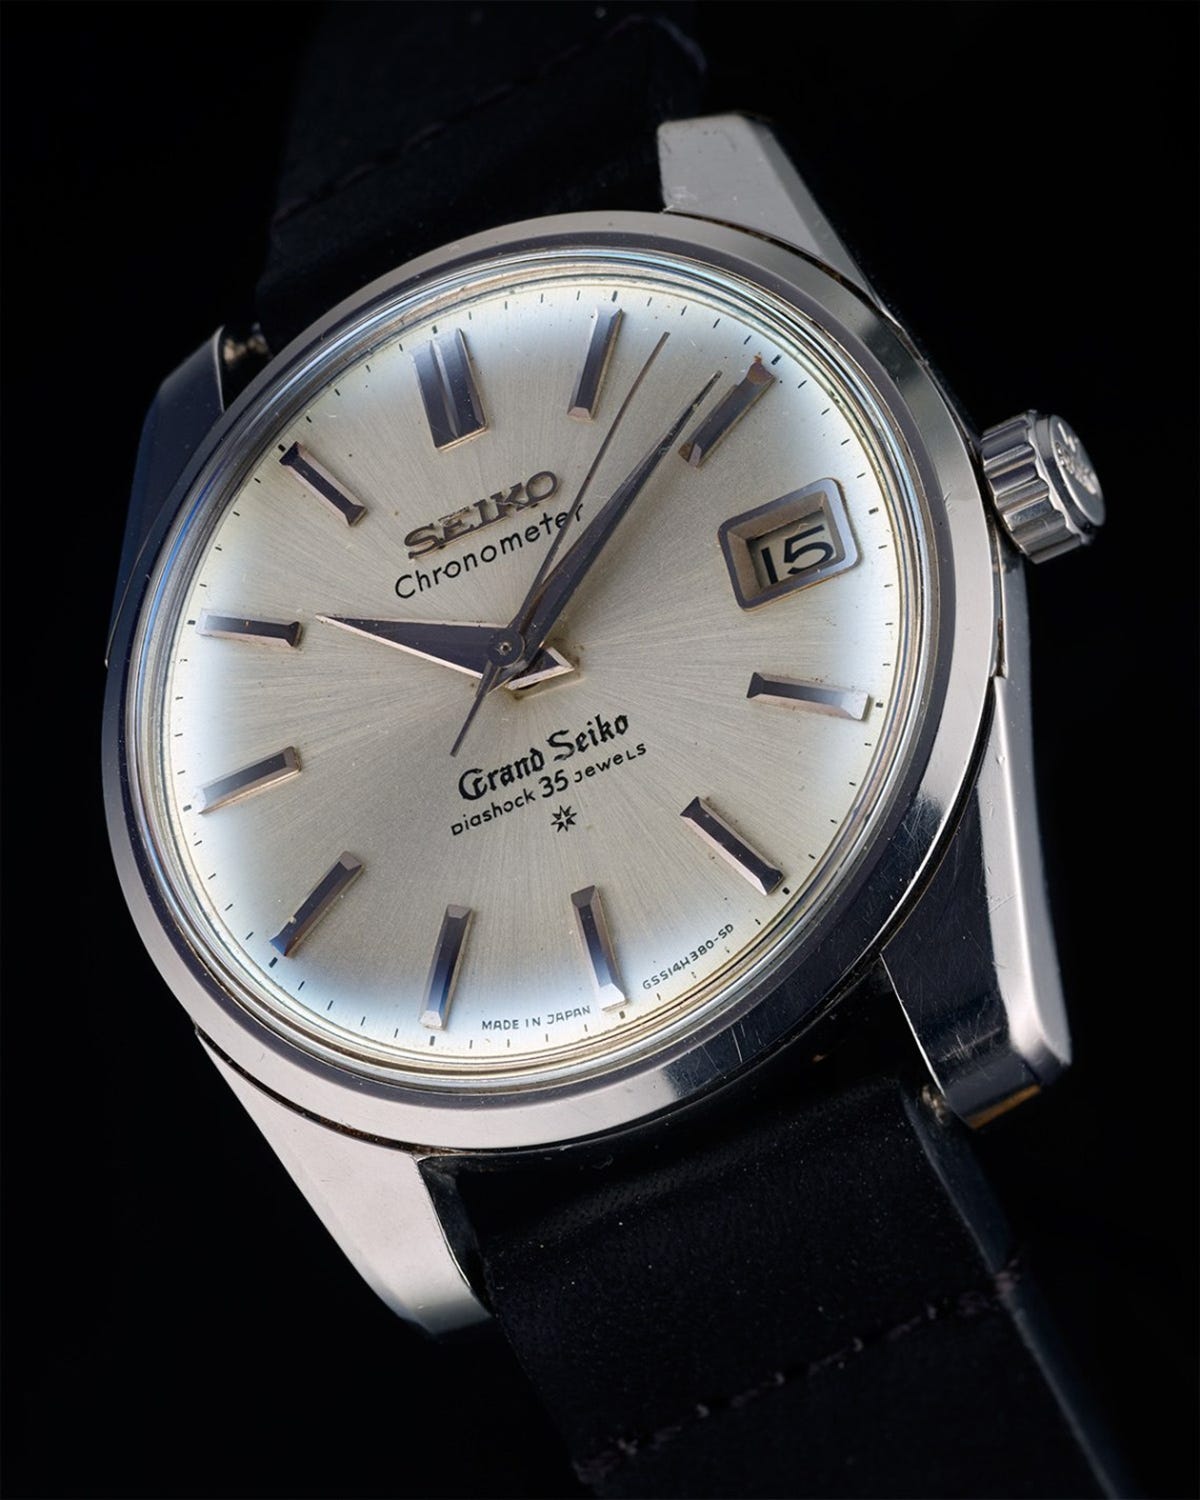 Vintage Grand Seiko models not appearing in catalogues - 57GS and 44GS